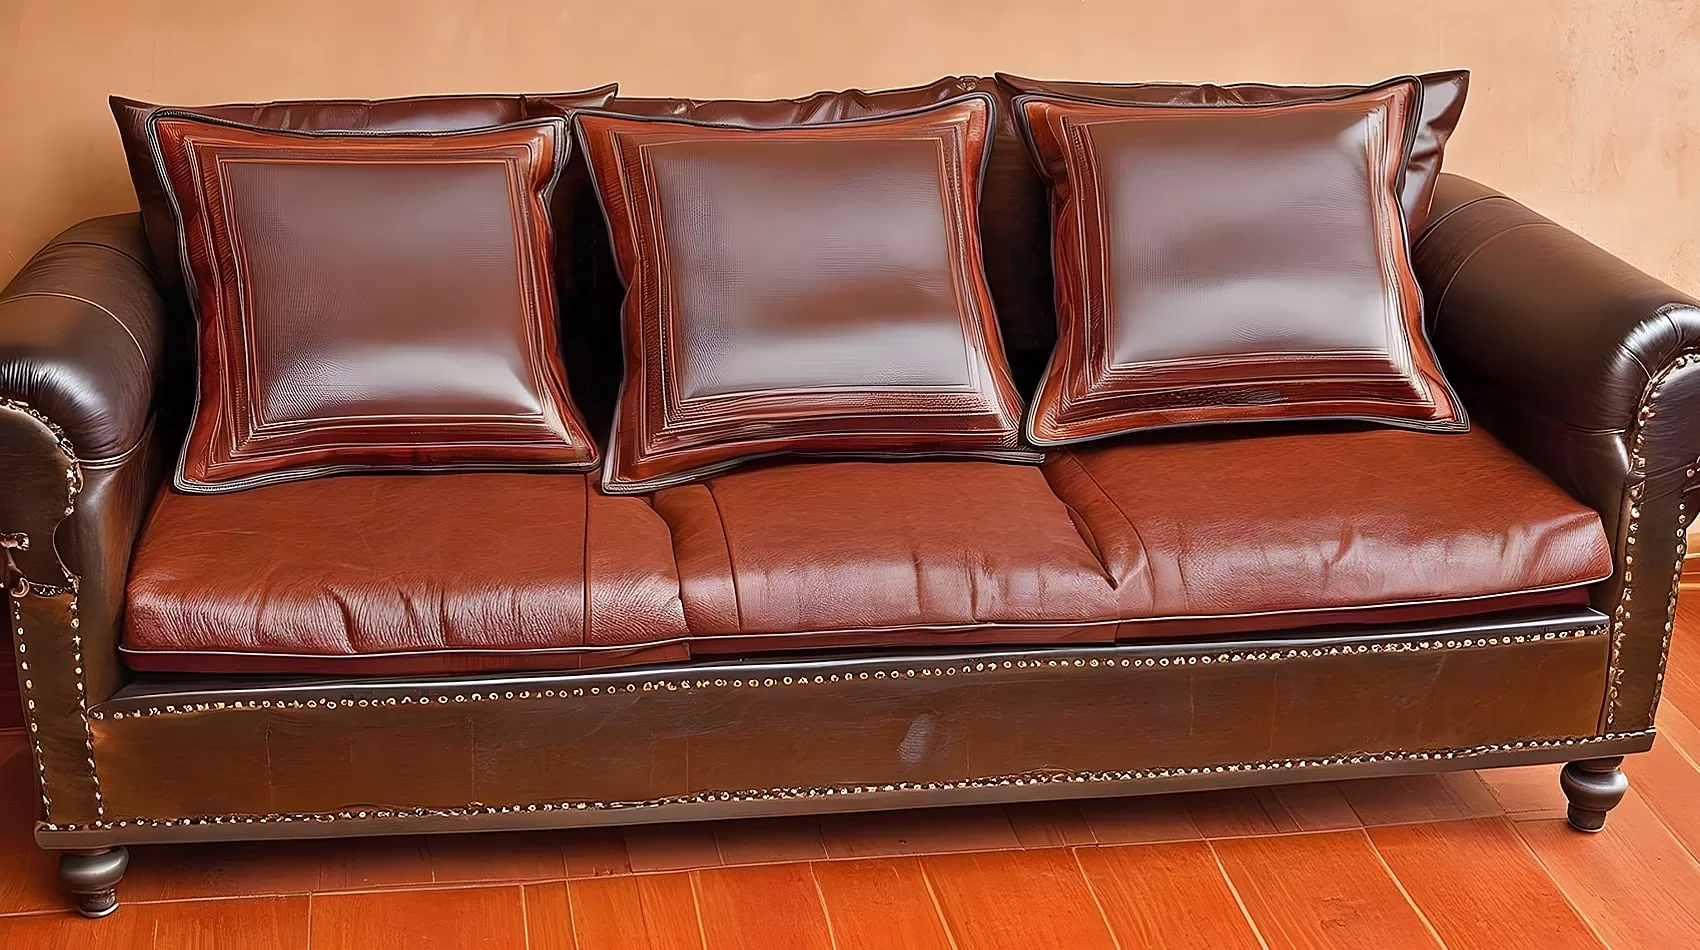 Leather Covers | Leather Couch Cushion Covers | Leather Sofa Cushion Covers